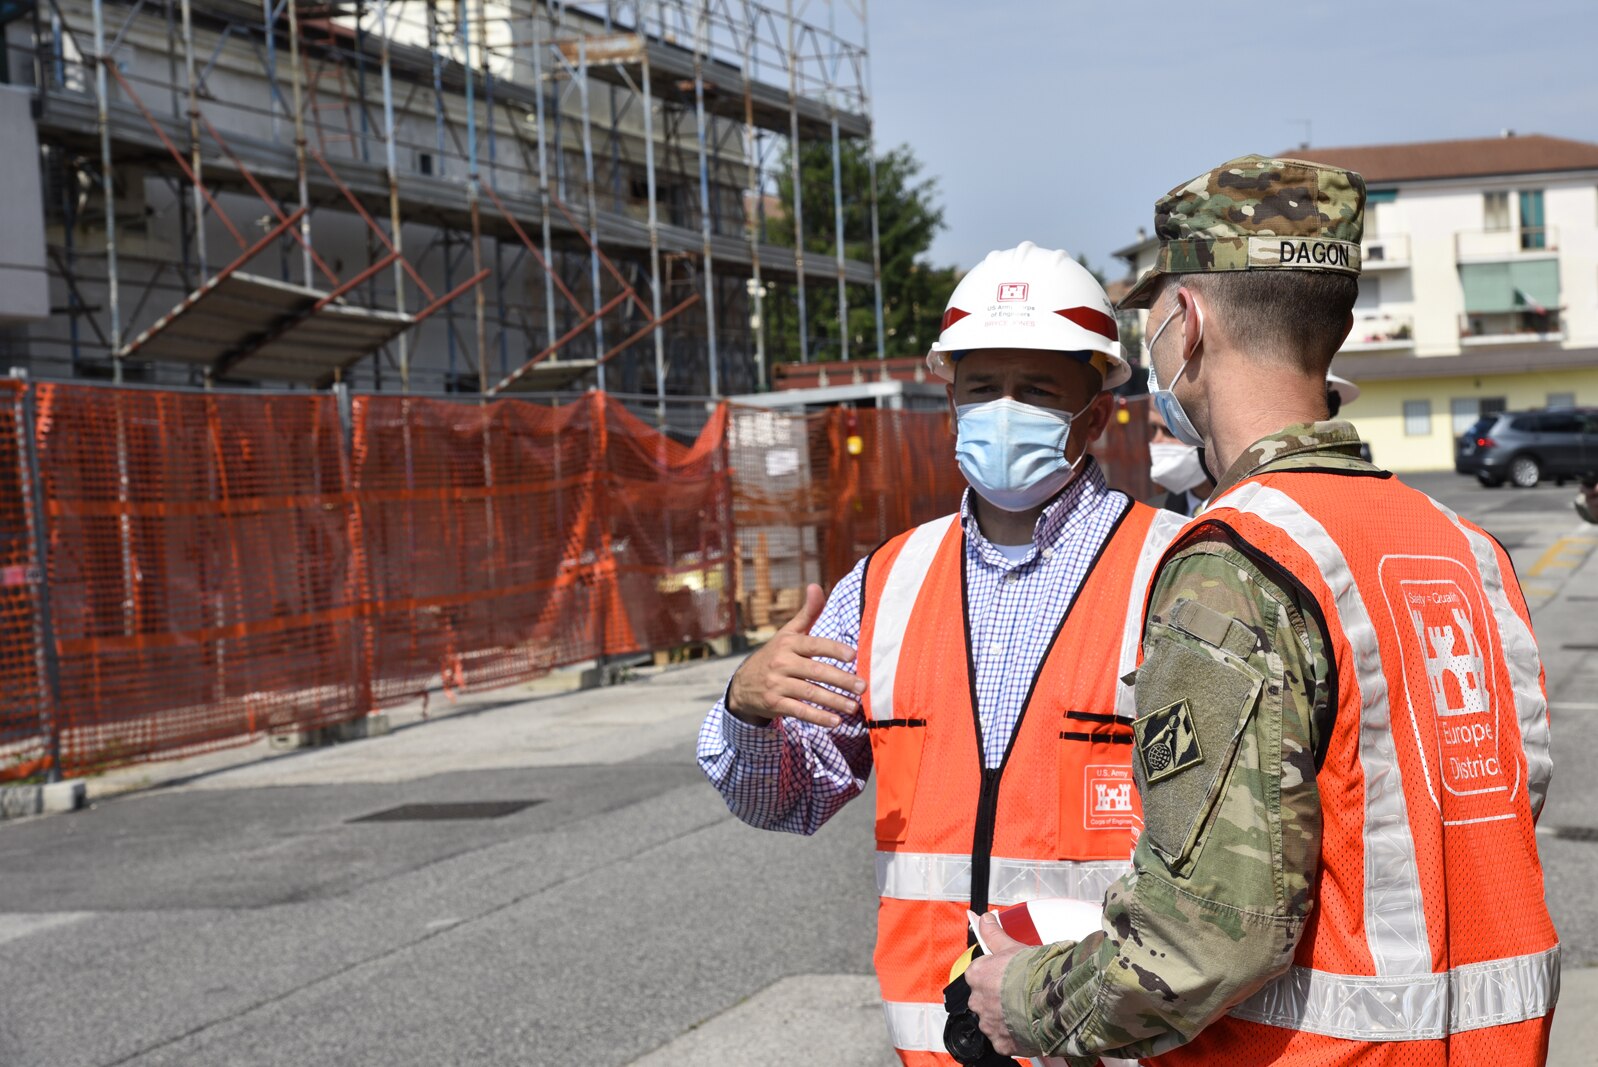 U.S. Army Corps of Engineers, Europe District Southern Europe Area Engineer Bryce Jones discusses nearby ongoing construction at Caserma Ederle, part of U.S. Army Garrison Italy in the Vicenza area, during a tour of the installation with Europe District Commander Col. Pat Dagon June 9, 2021. Jones was recognized as the U.S. Army Corps of Engineers Administrative Contracting Officer of the Year during a virtual ceremony October 25, 2021 for his work in support of the U.S. Army Corps of Engineers missions in Italy as well as several other Southern European countries. (U.S. Army photo by Chris Augsburger)